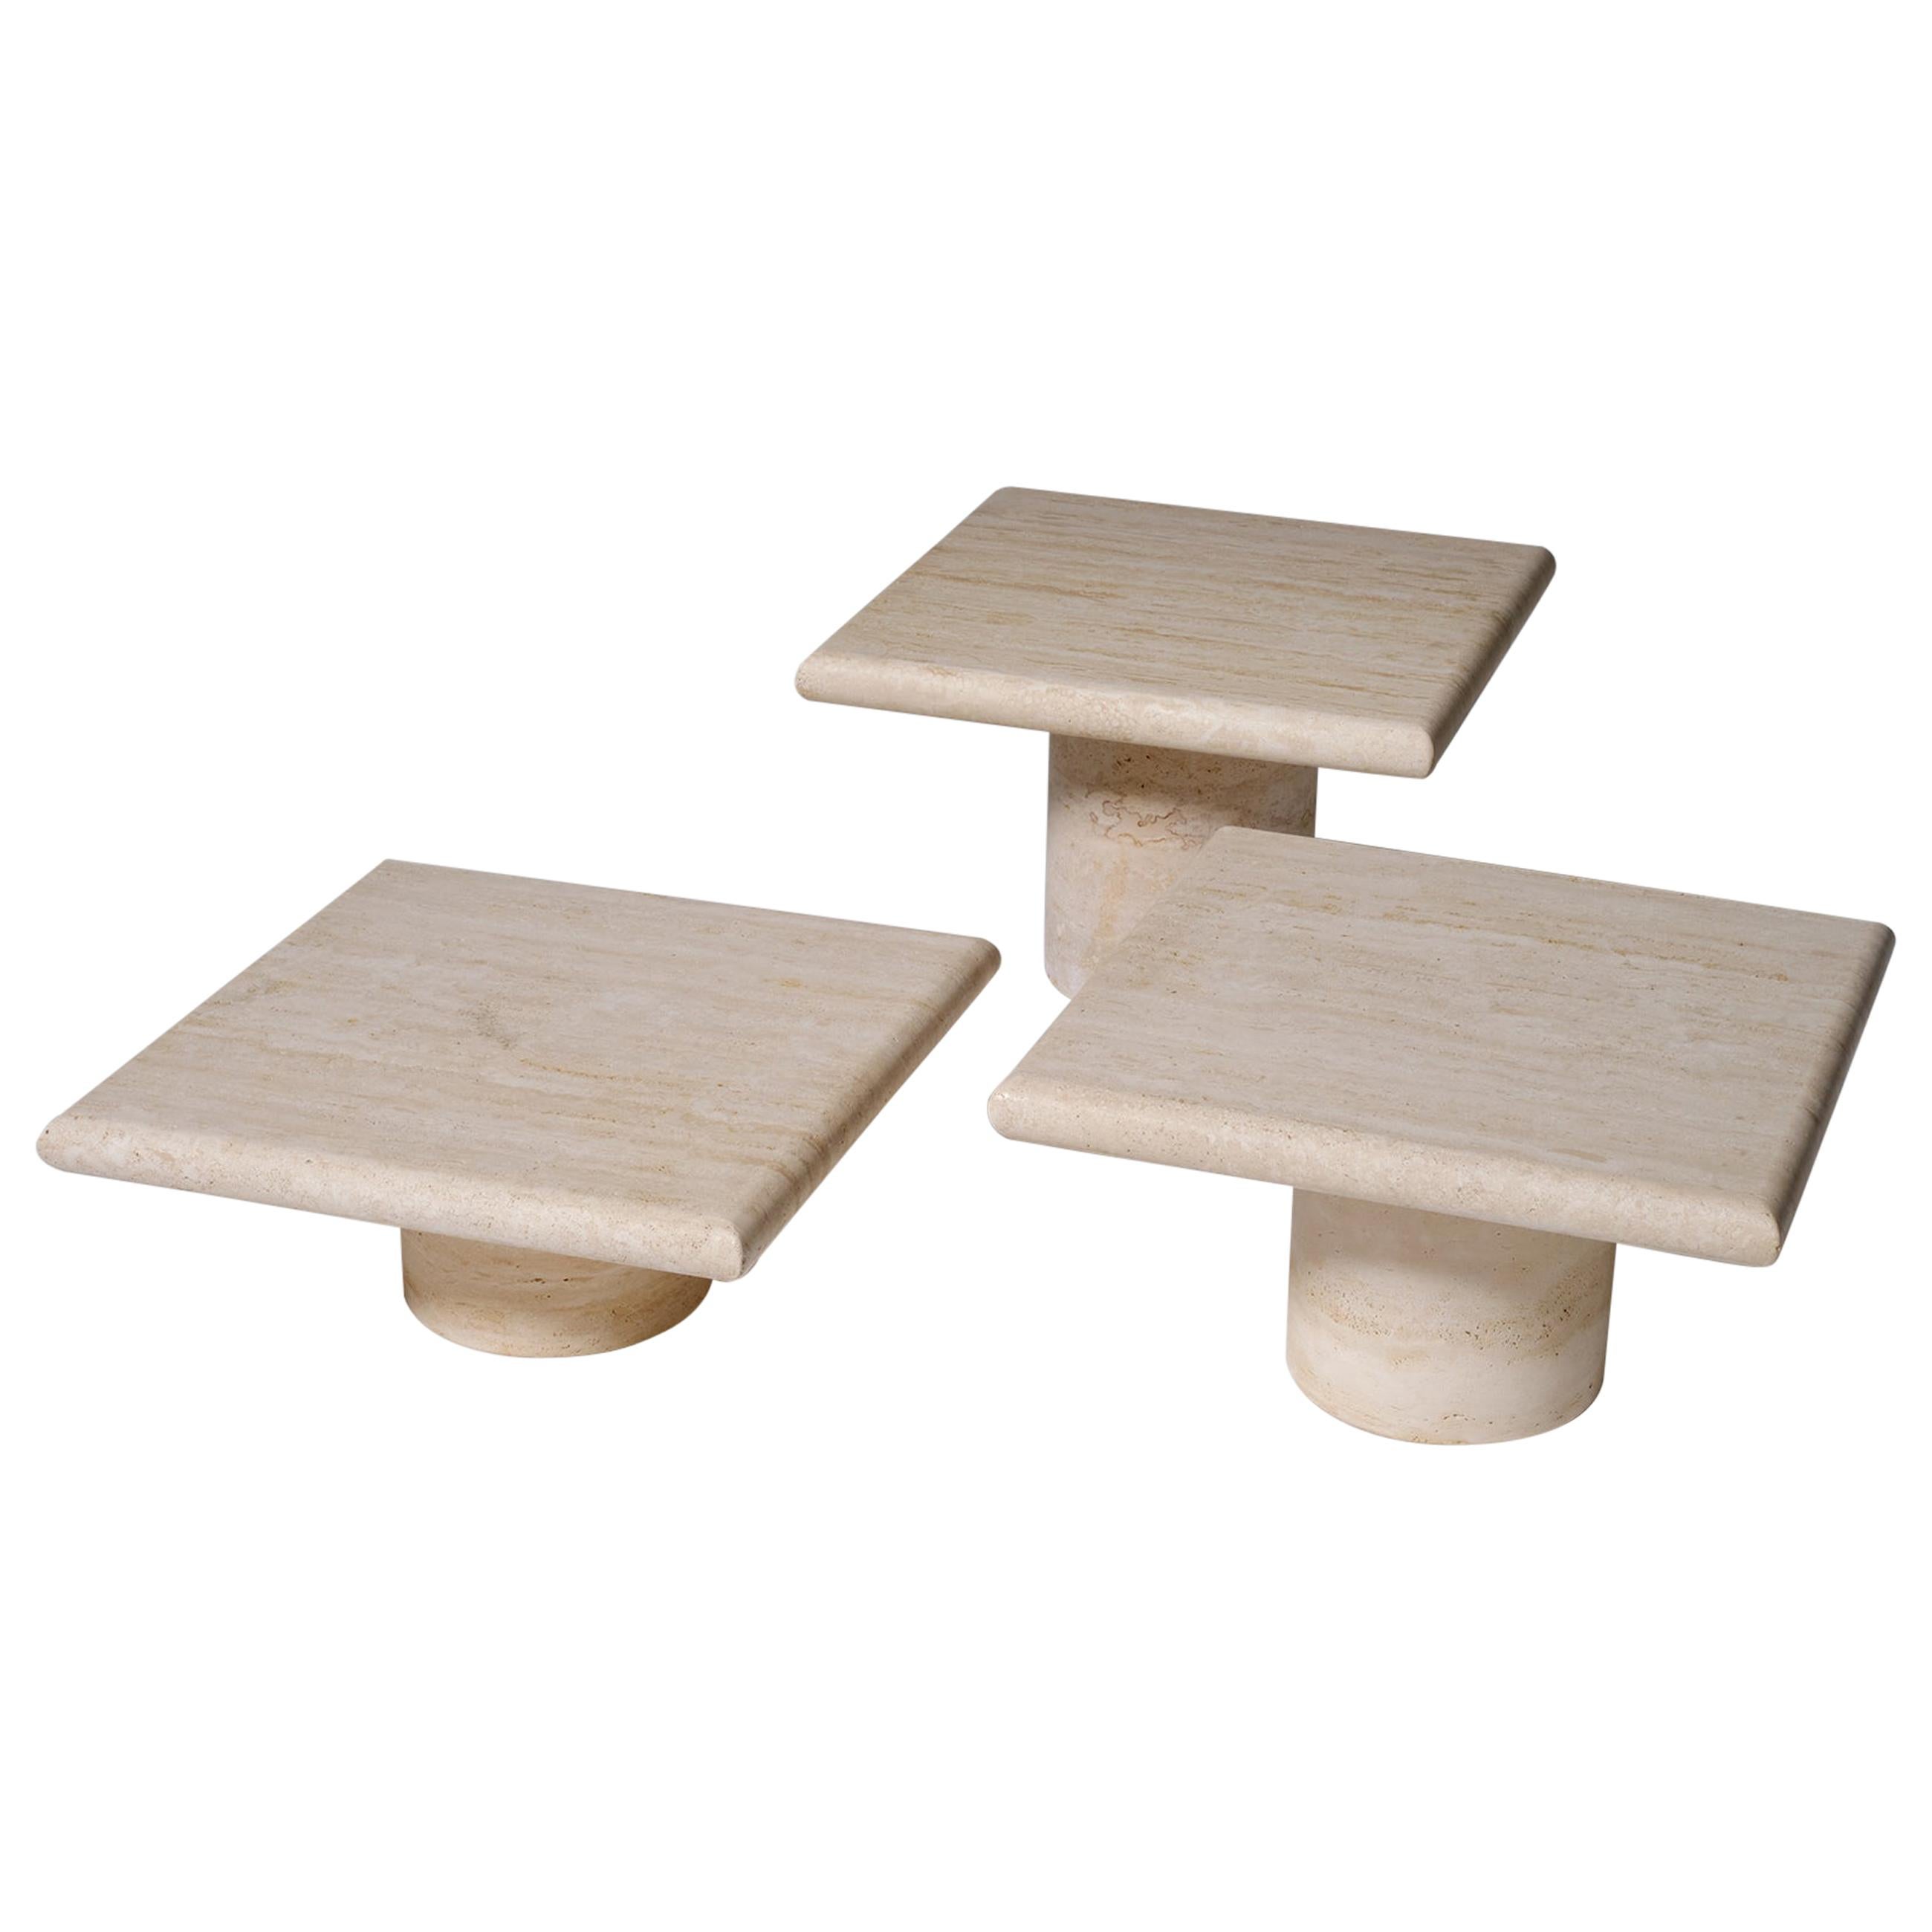 Set of Three Travertine Nesting Tables by Up & Up, Italy, 1970s